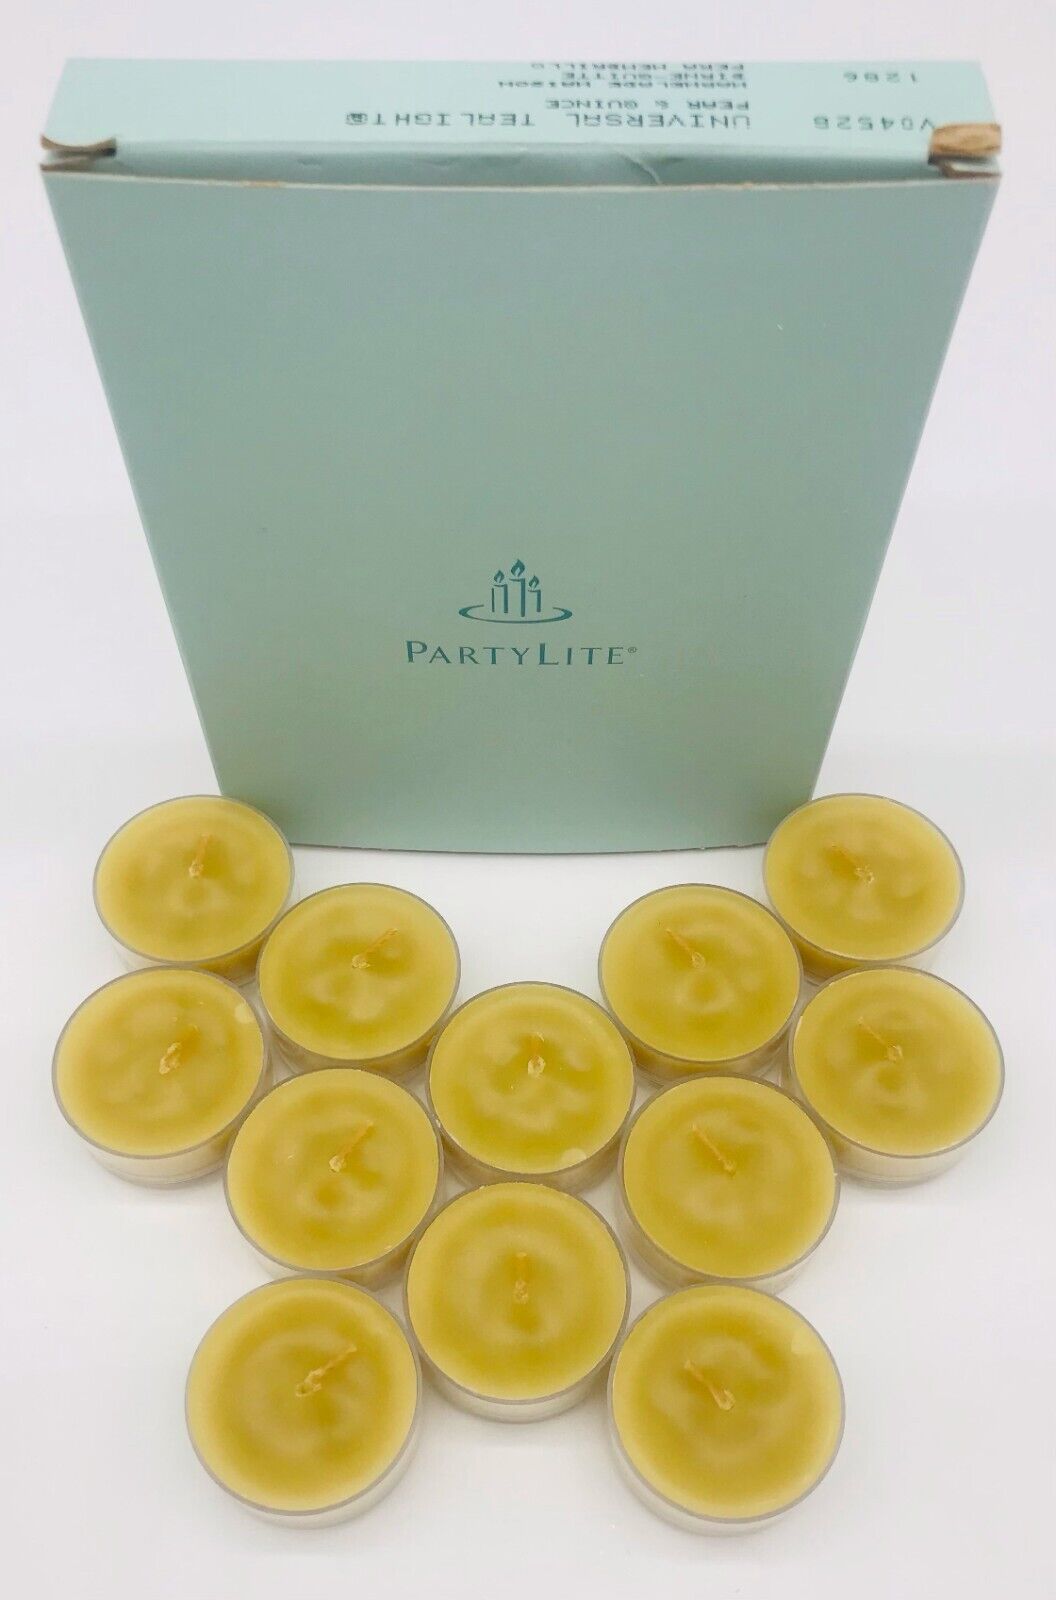 Partylite Tealight Candles - Multiple Scents Available